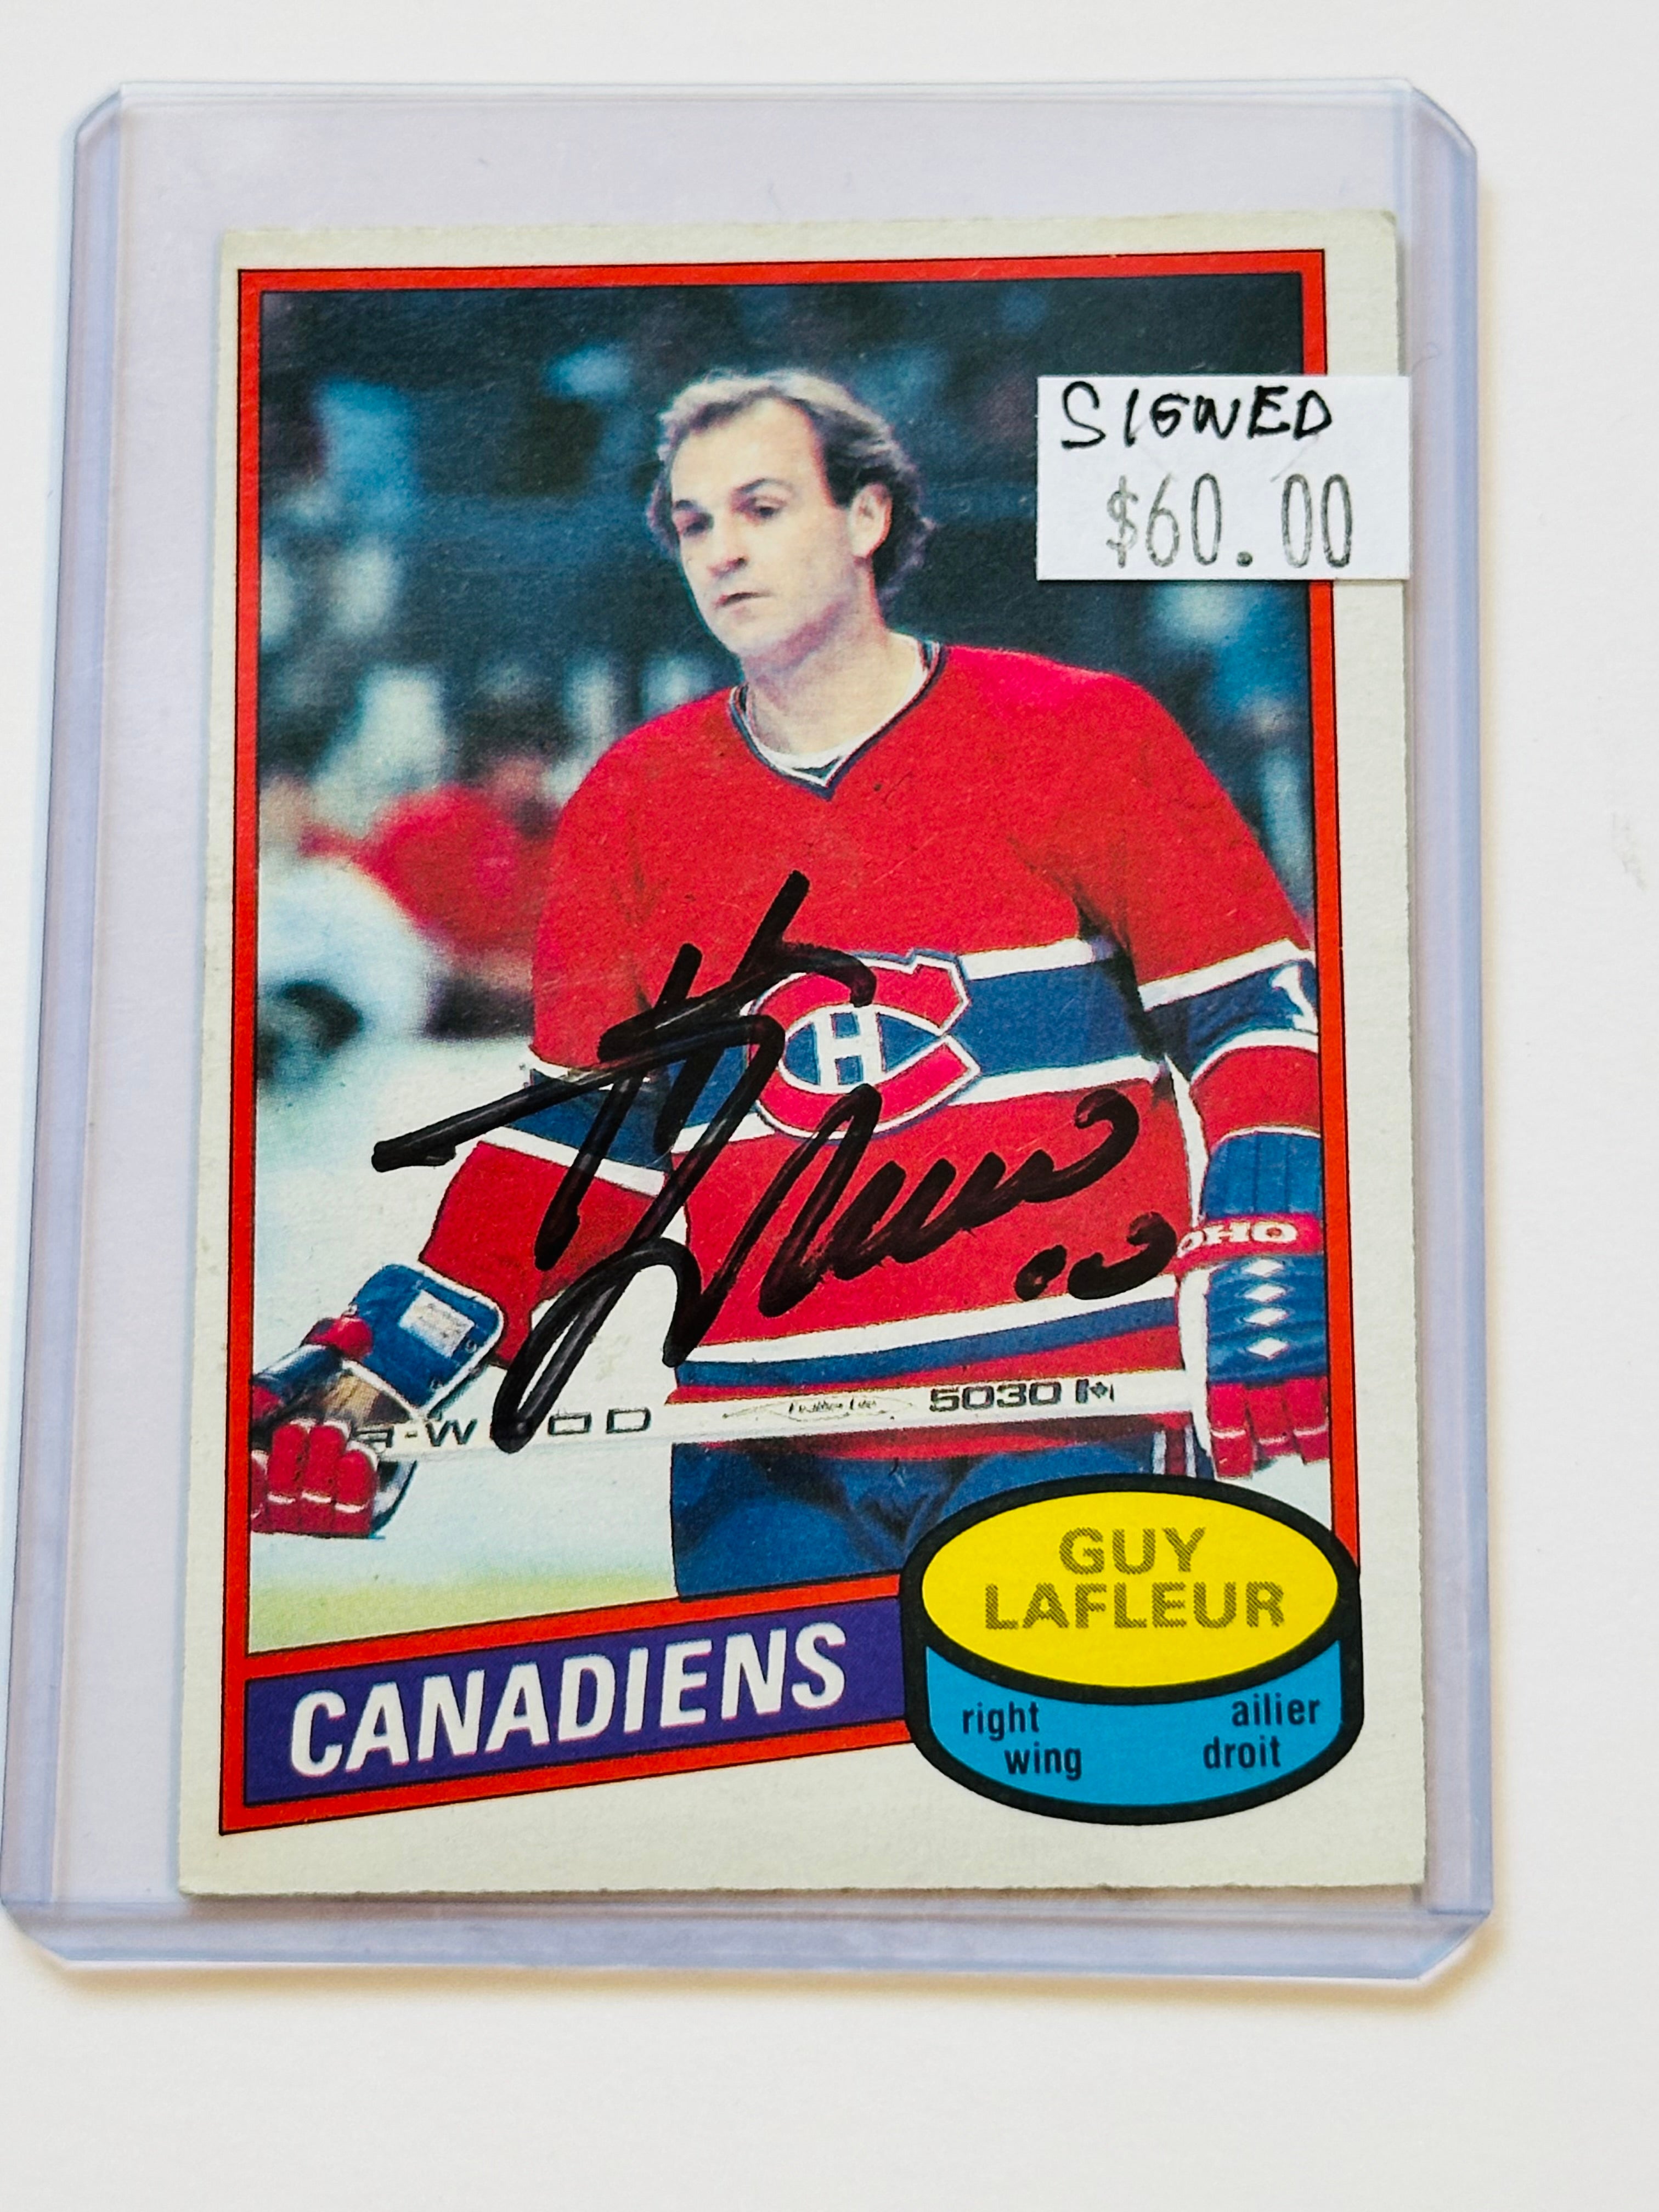 Guy LaFleur ￼ Montréal Canadiens hockey legend autographed card in person sold the certificate of authenticity.